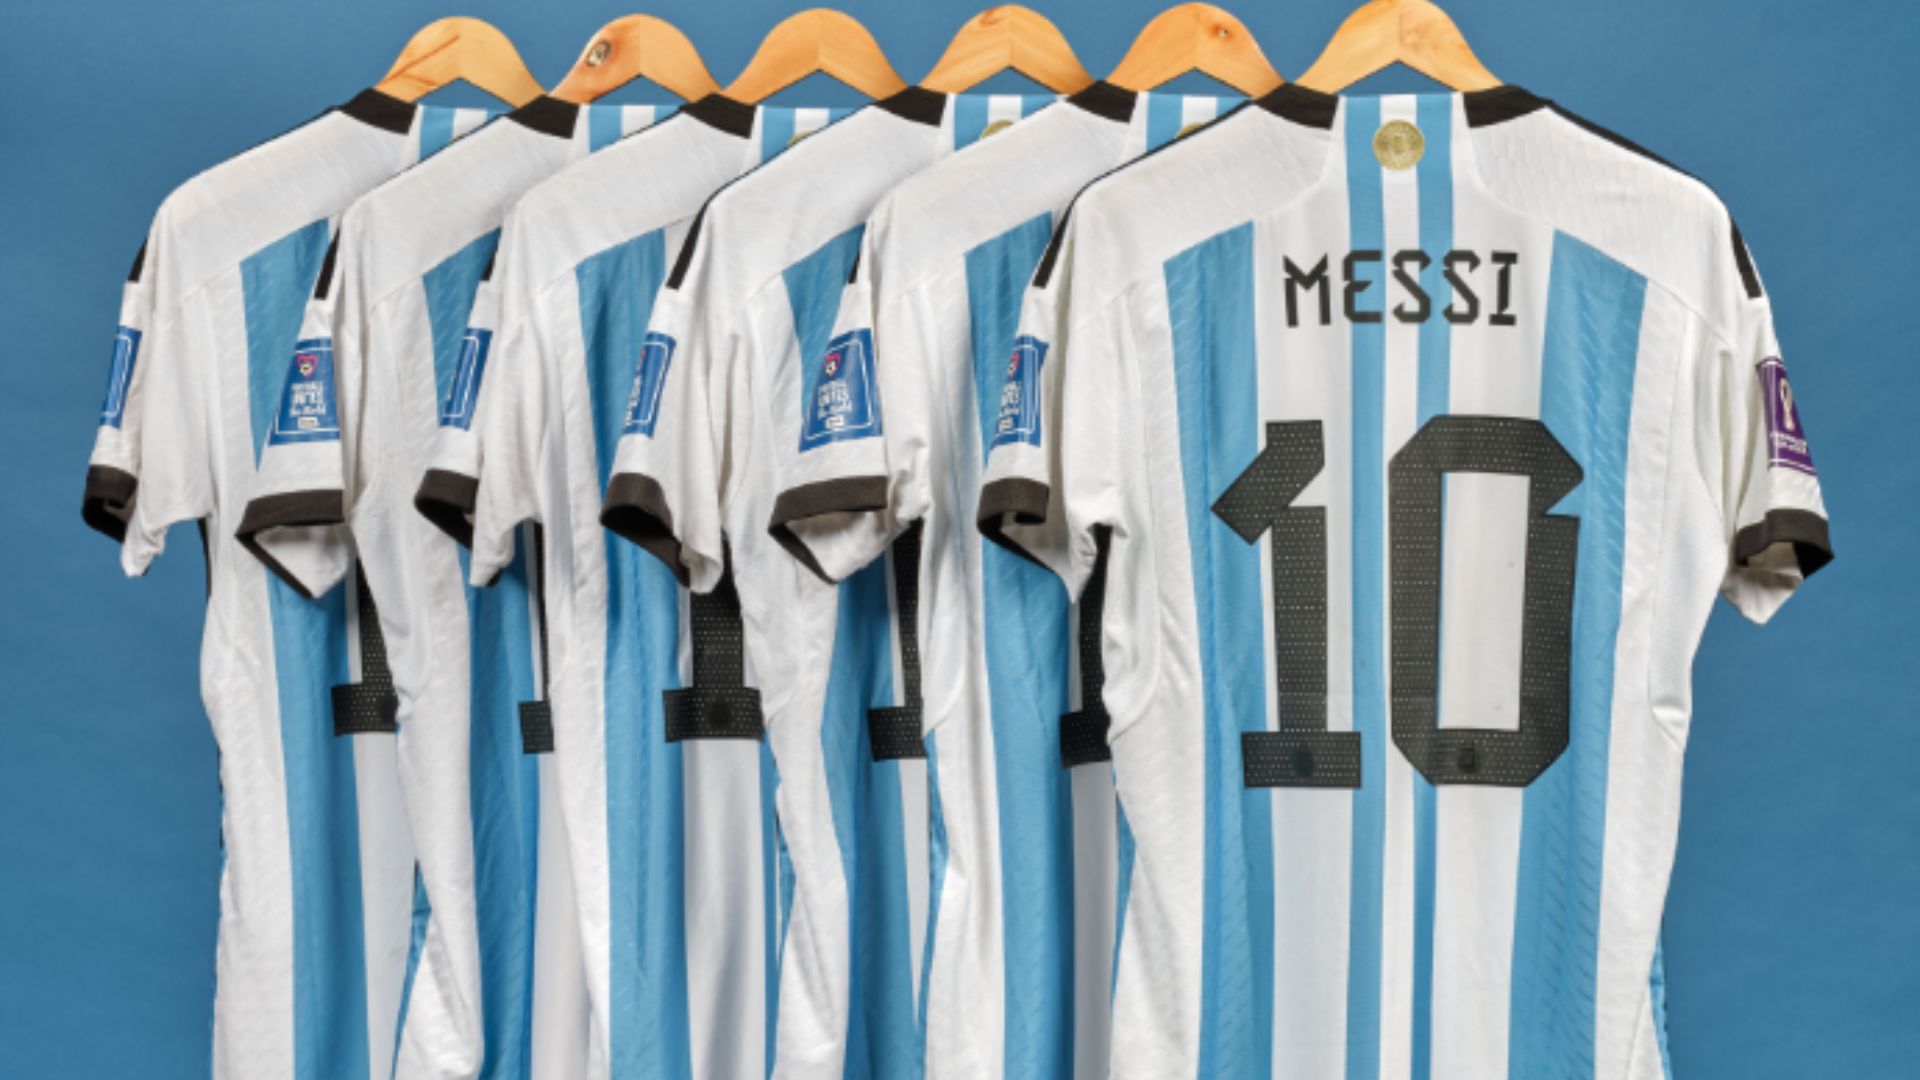 Set of 6 Messi World Cup shirts sells for $7.8 million at auction in New  York - WSVN 7News | Miami News, Weather, Sports | Fort Lauderdale